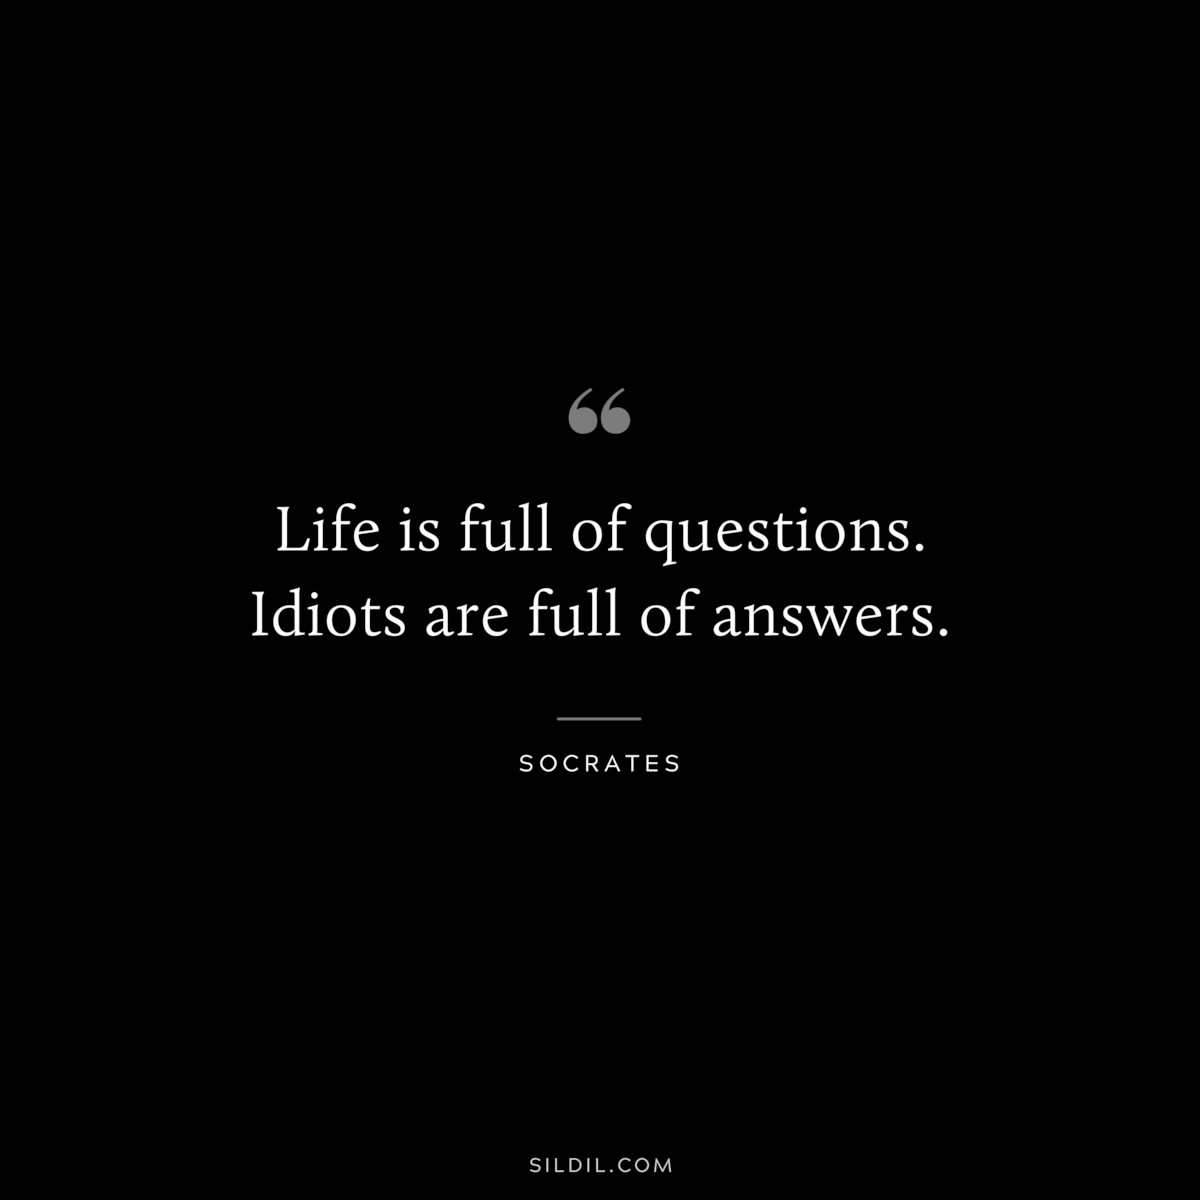 Life is full of questions. Idiots are full of answers. ― Socrates